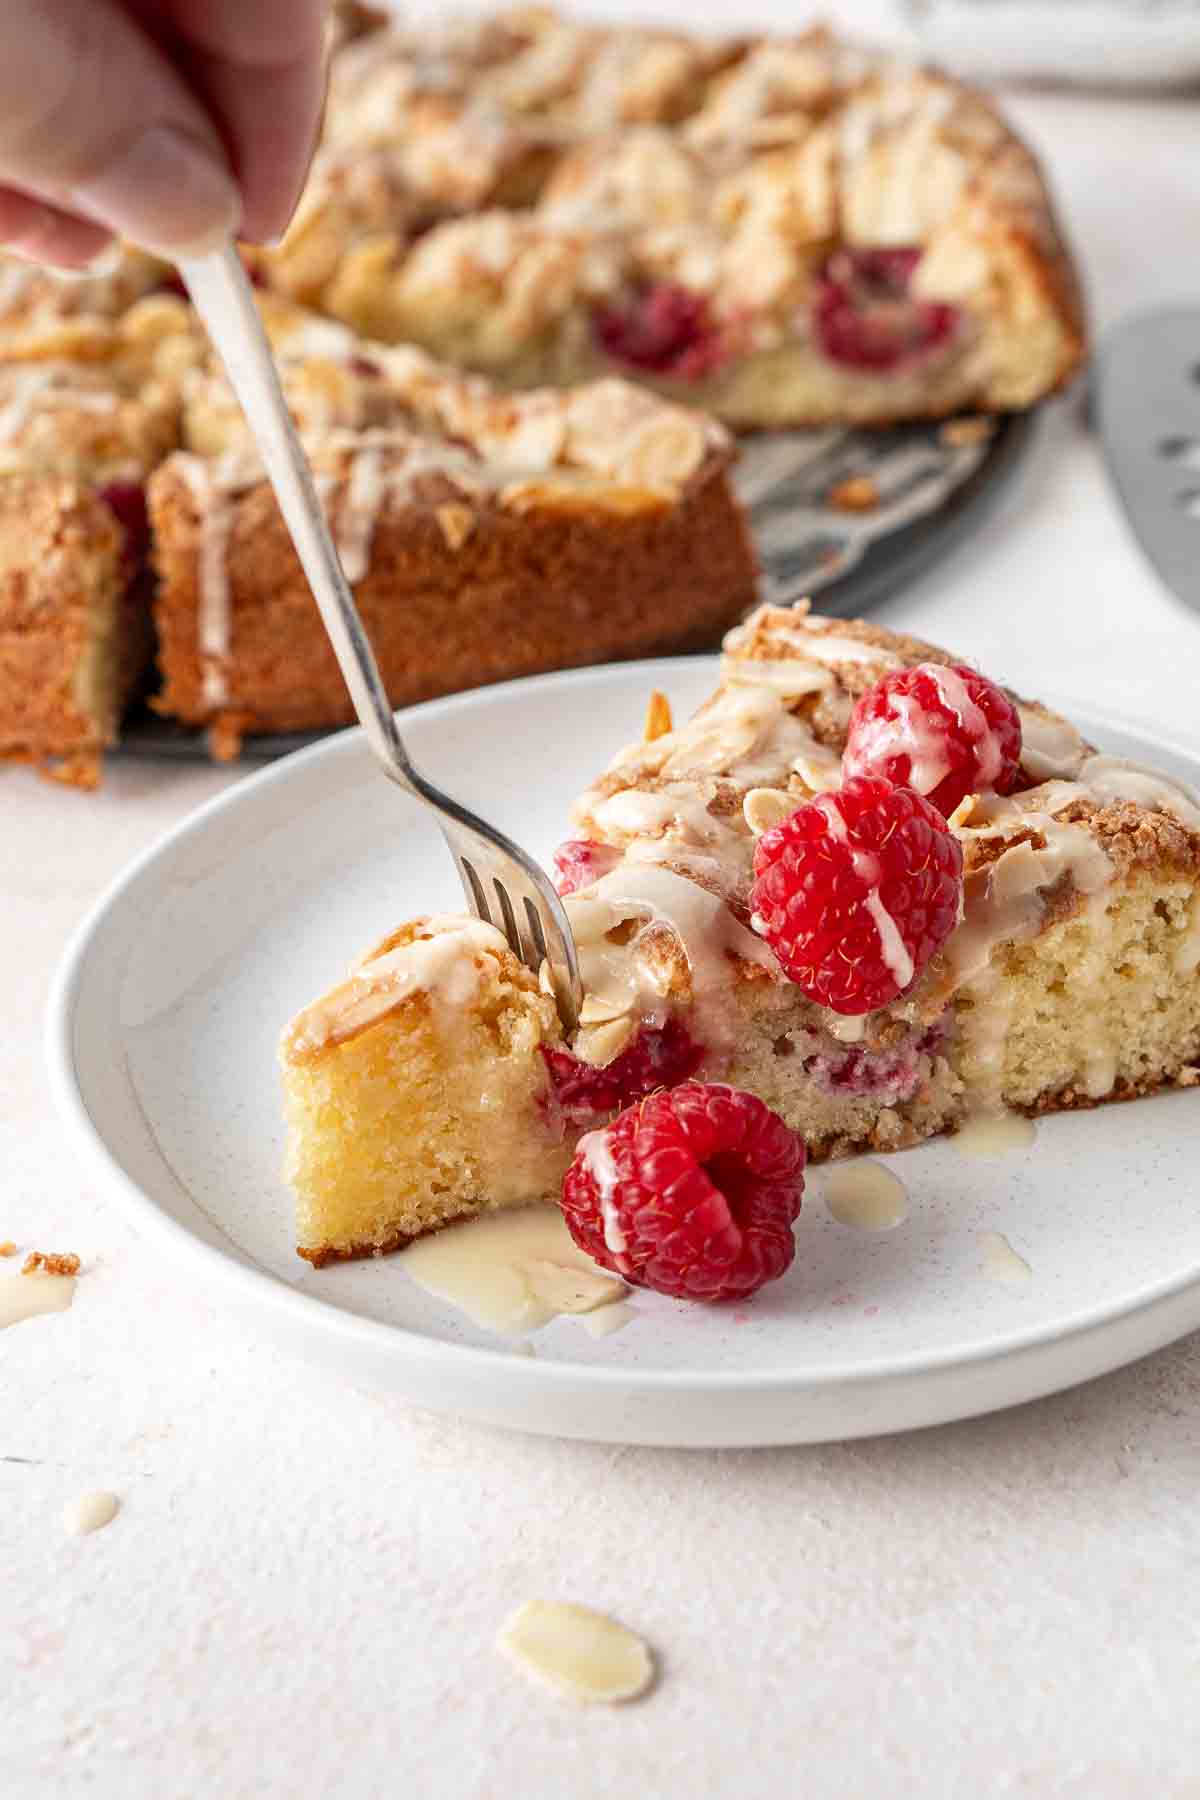 Close up of a fork taking a bite of a slice of almond and raspberry cake on a plate.